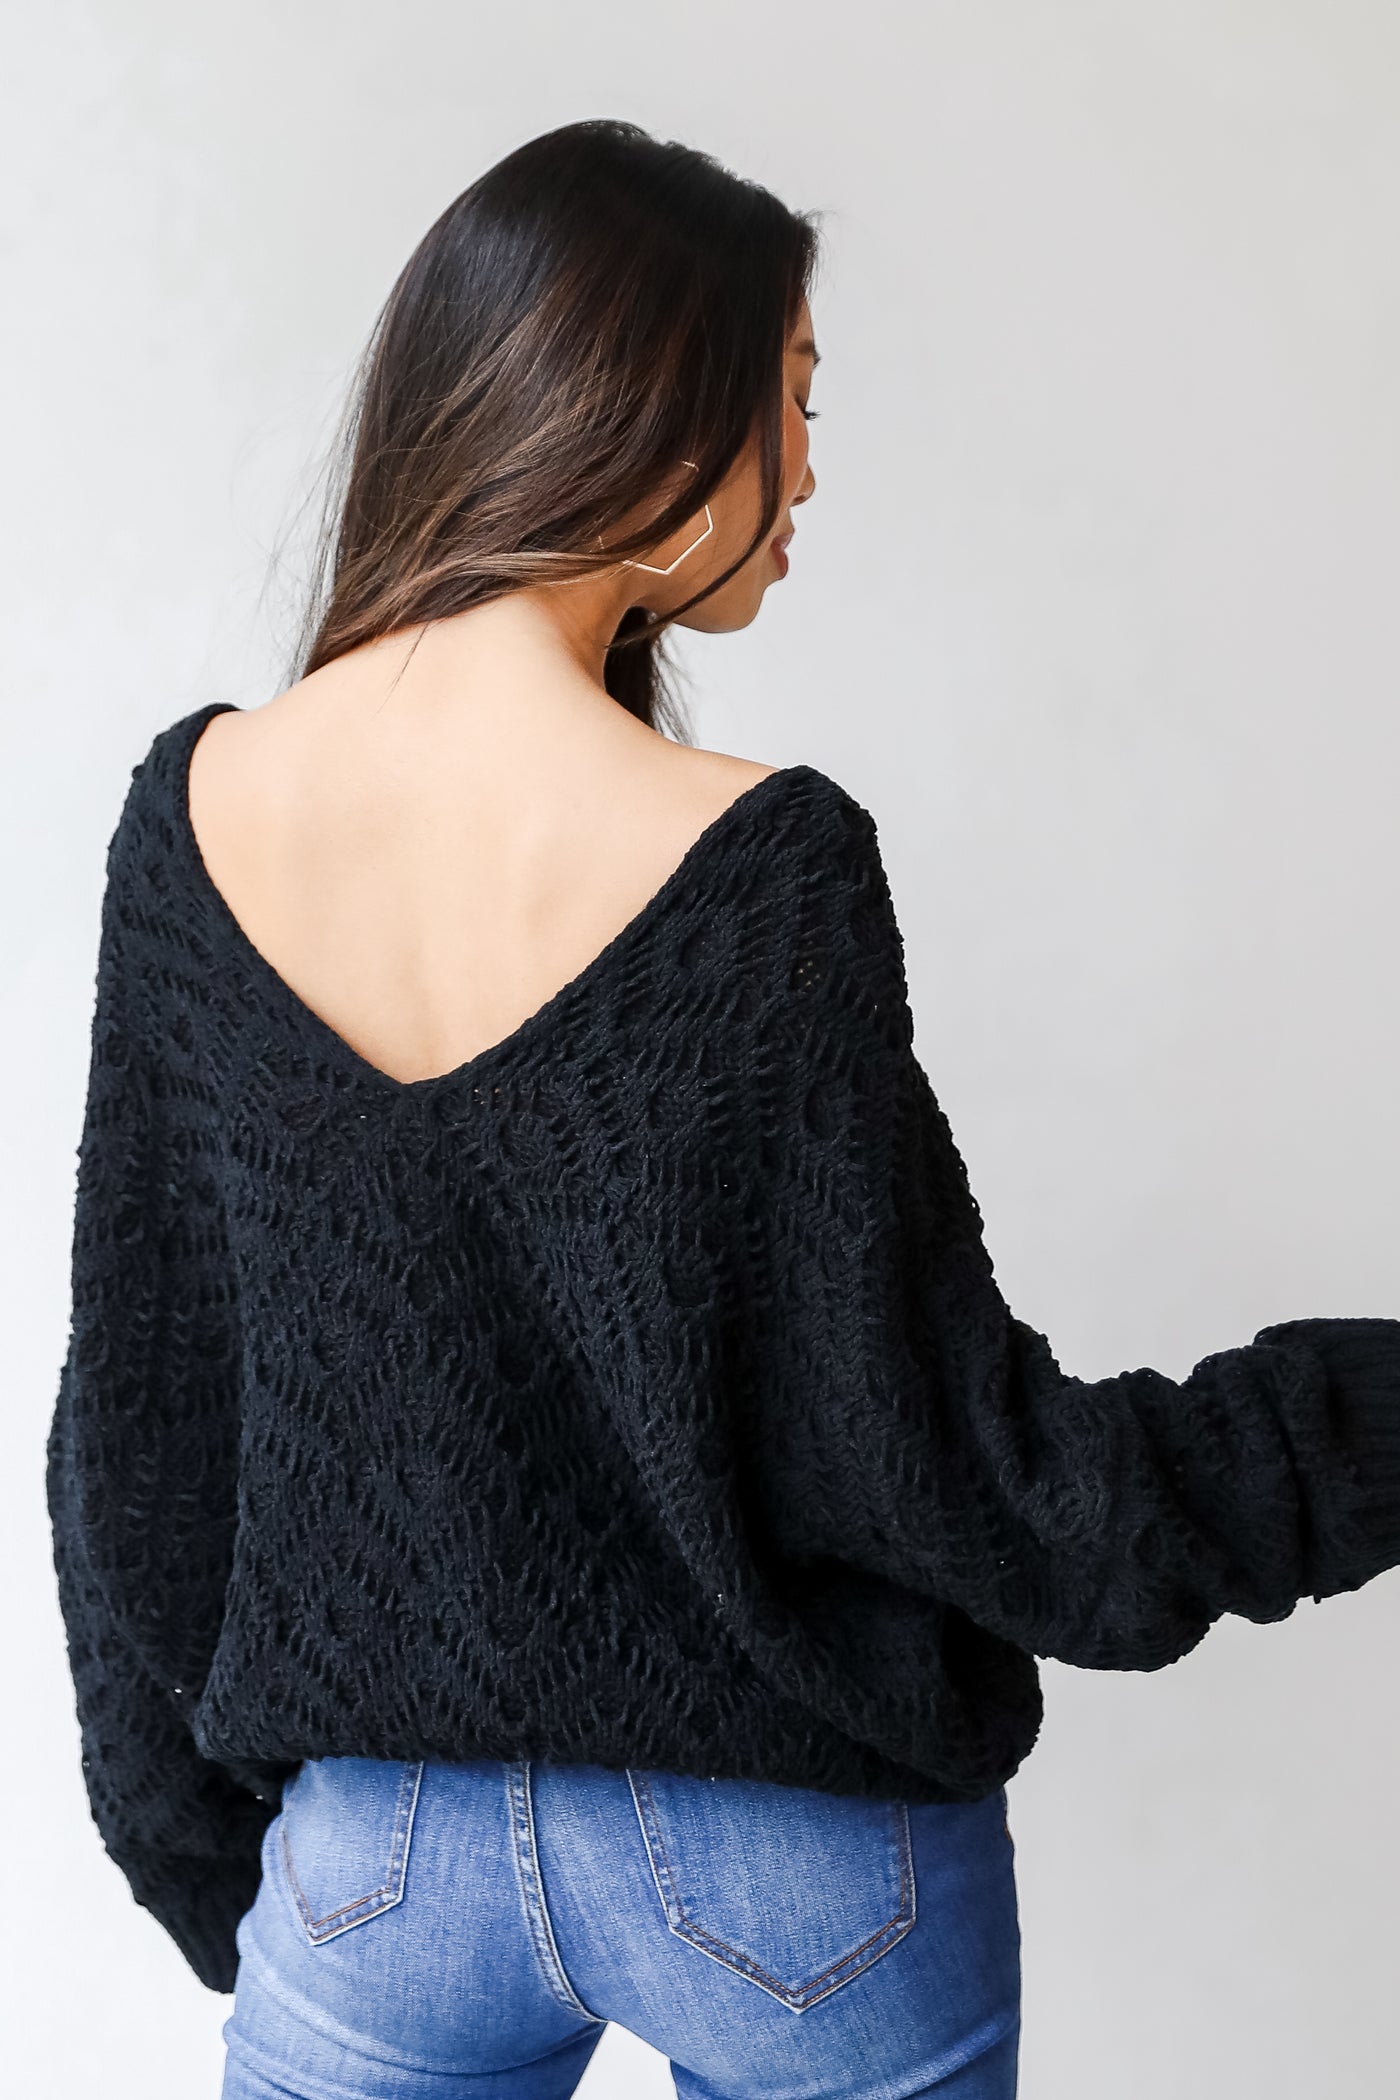 Chenille Sweater in black back view